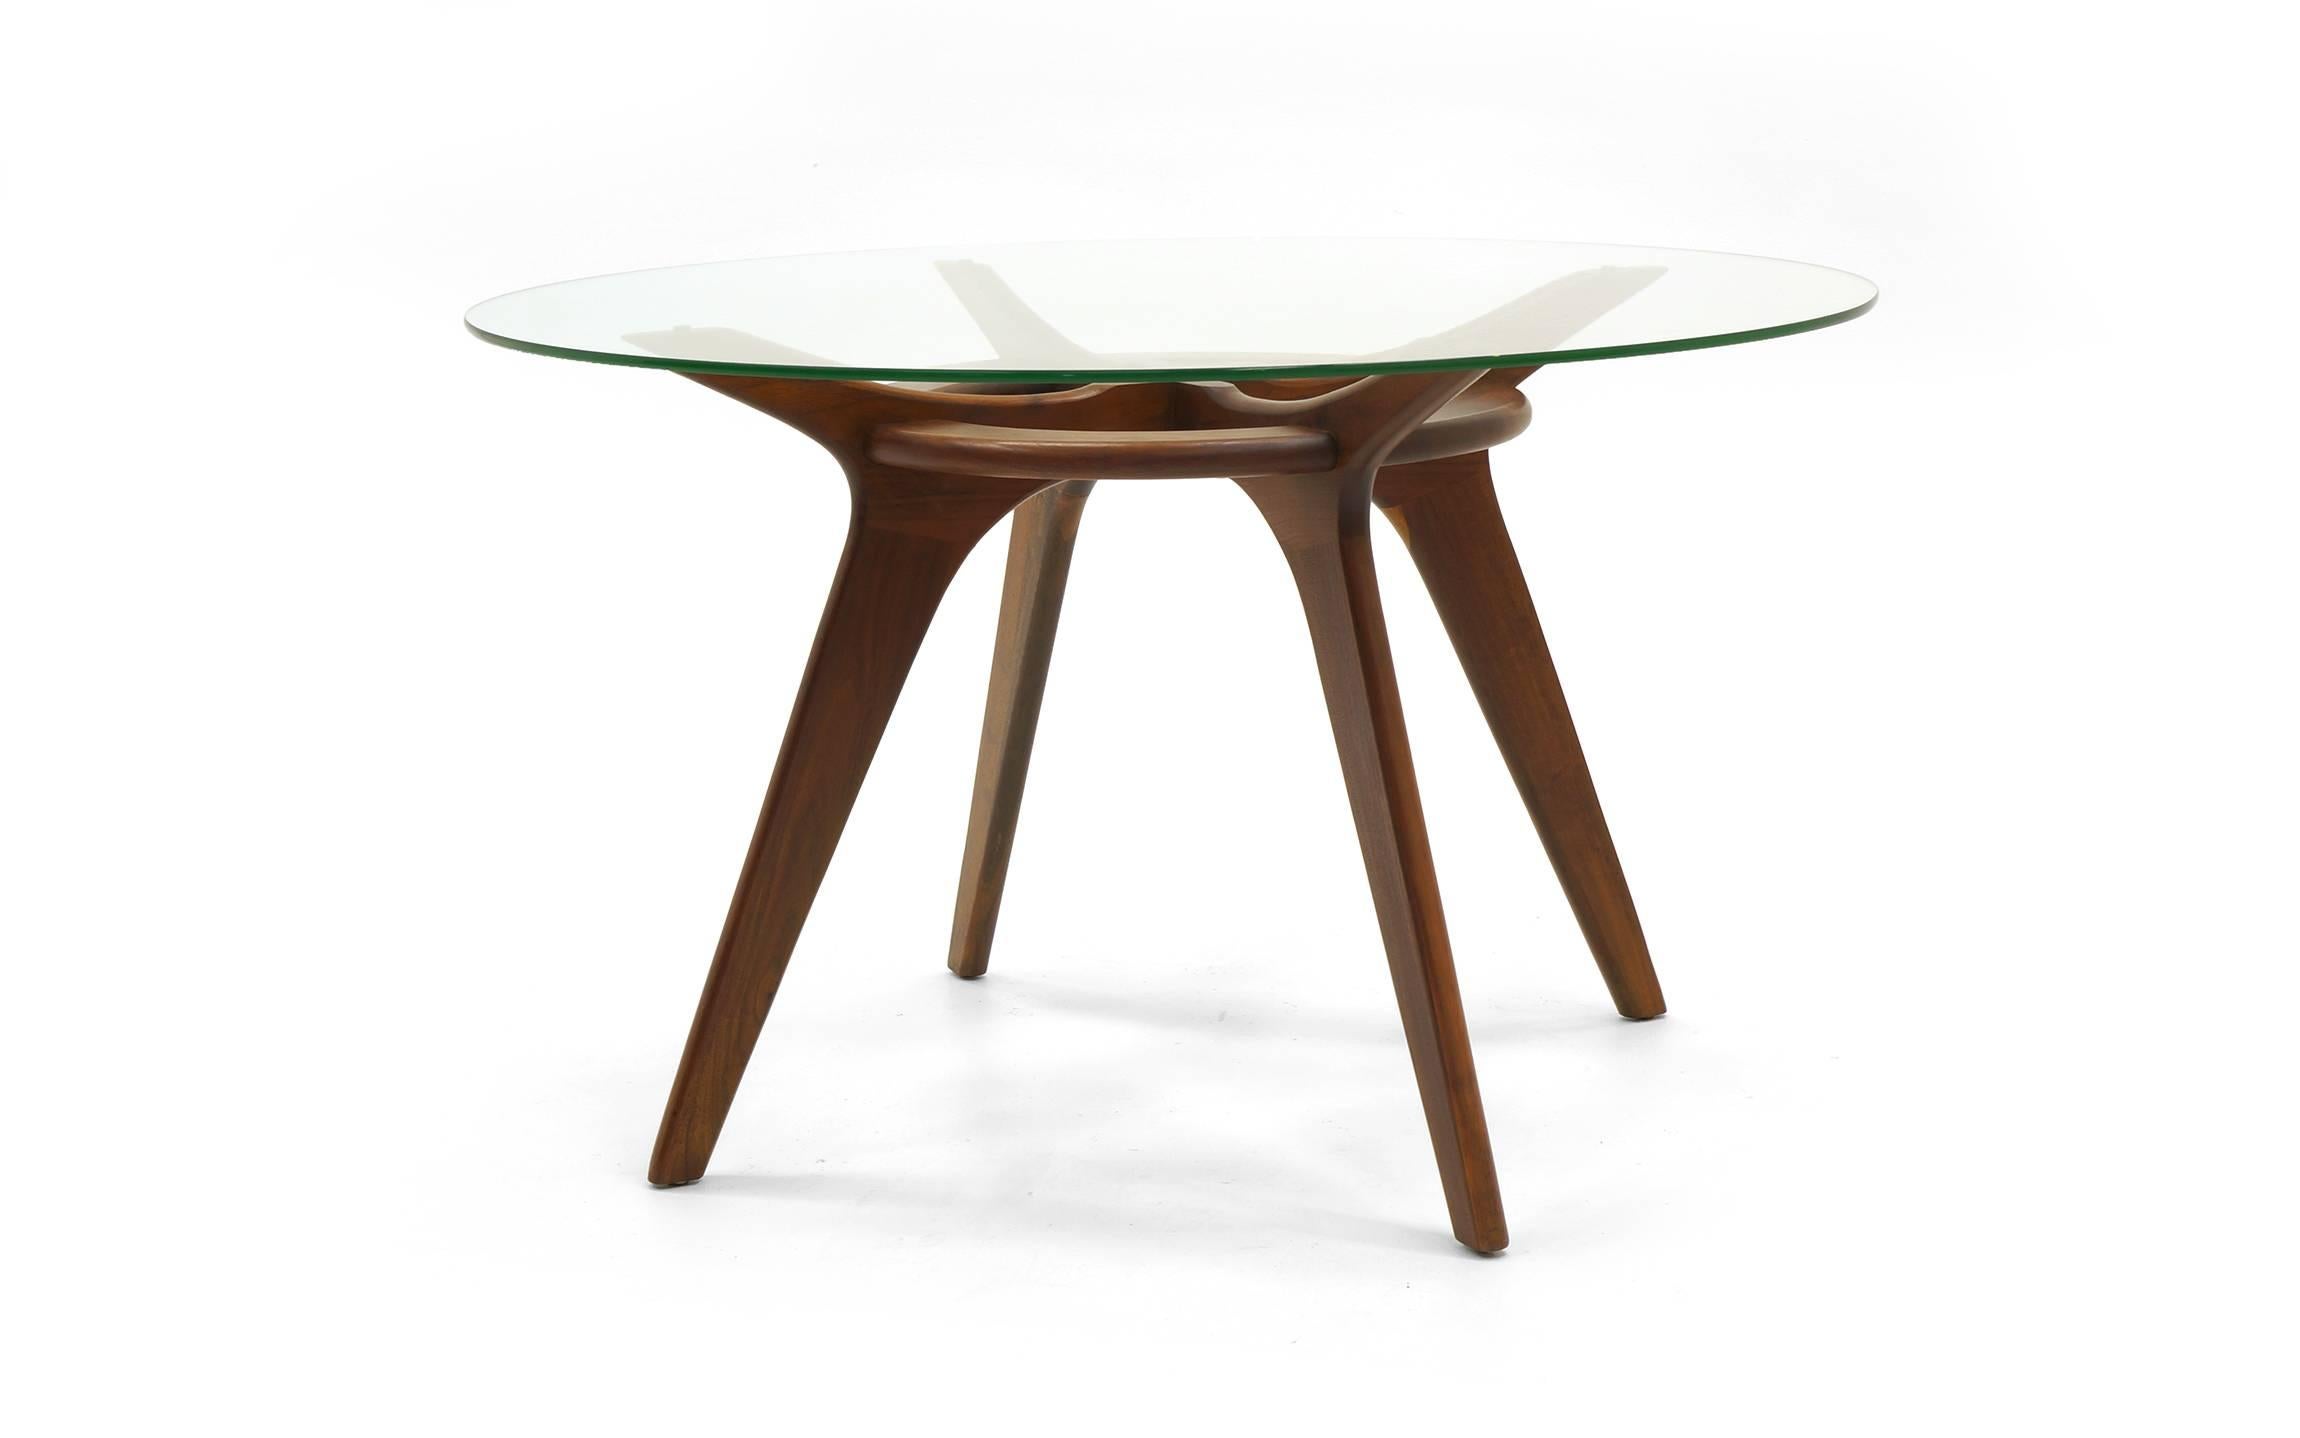 Adrian Pearsall round dining table. The original glass top is 48 inches in diameter and rests on a sculptural walnut base. A great example of this design in all original condition.